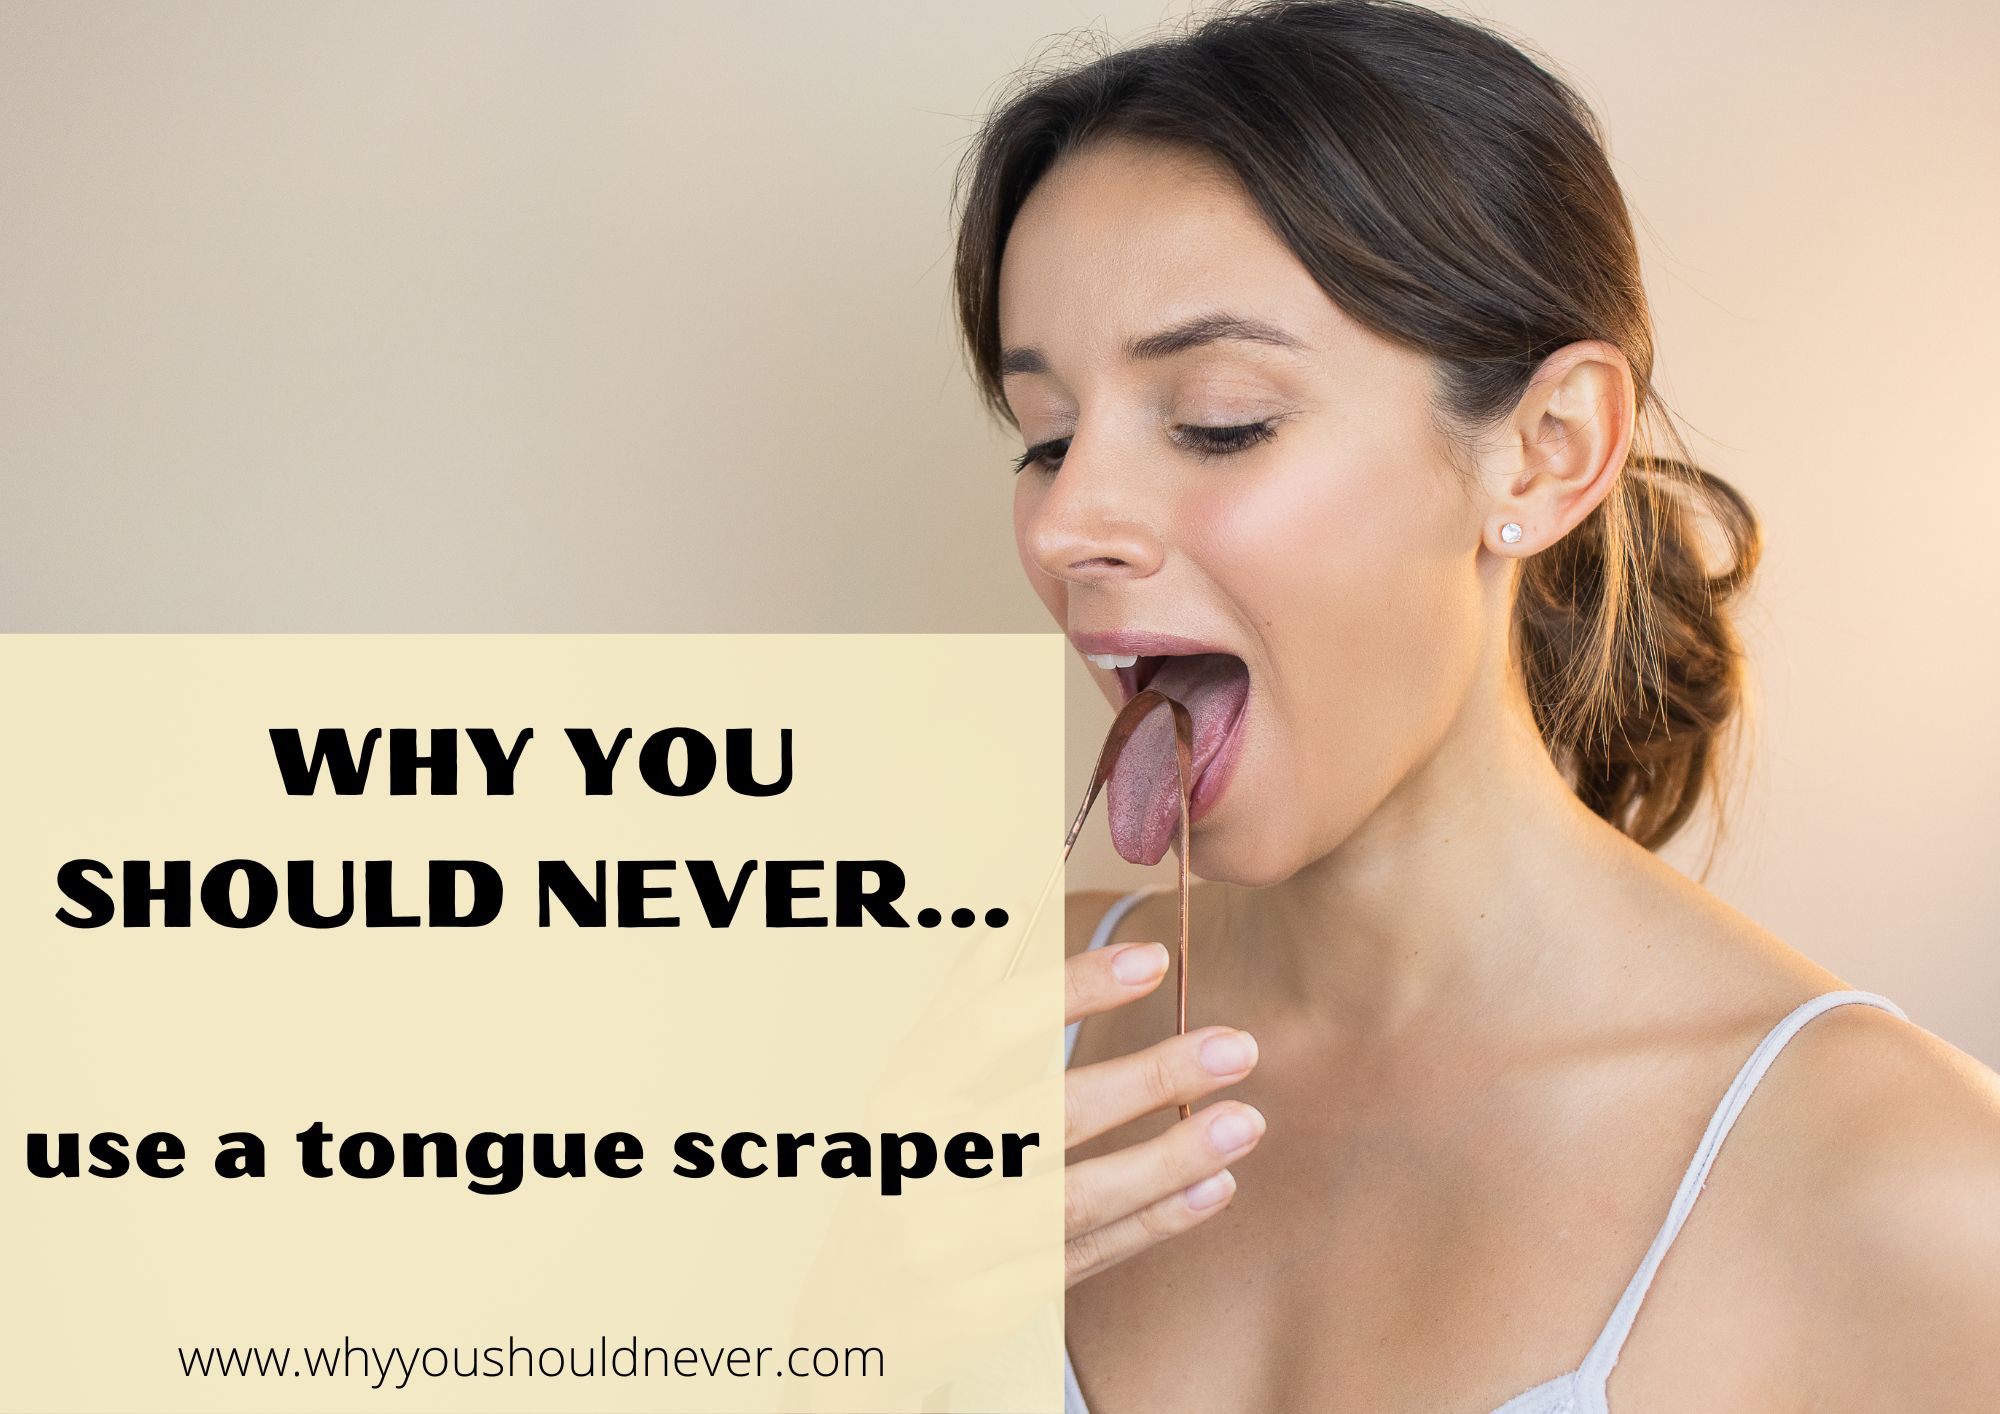 Why You Should Never Use A Tongue Scraper